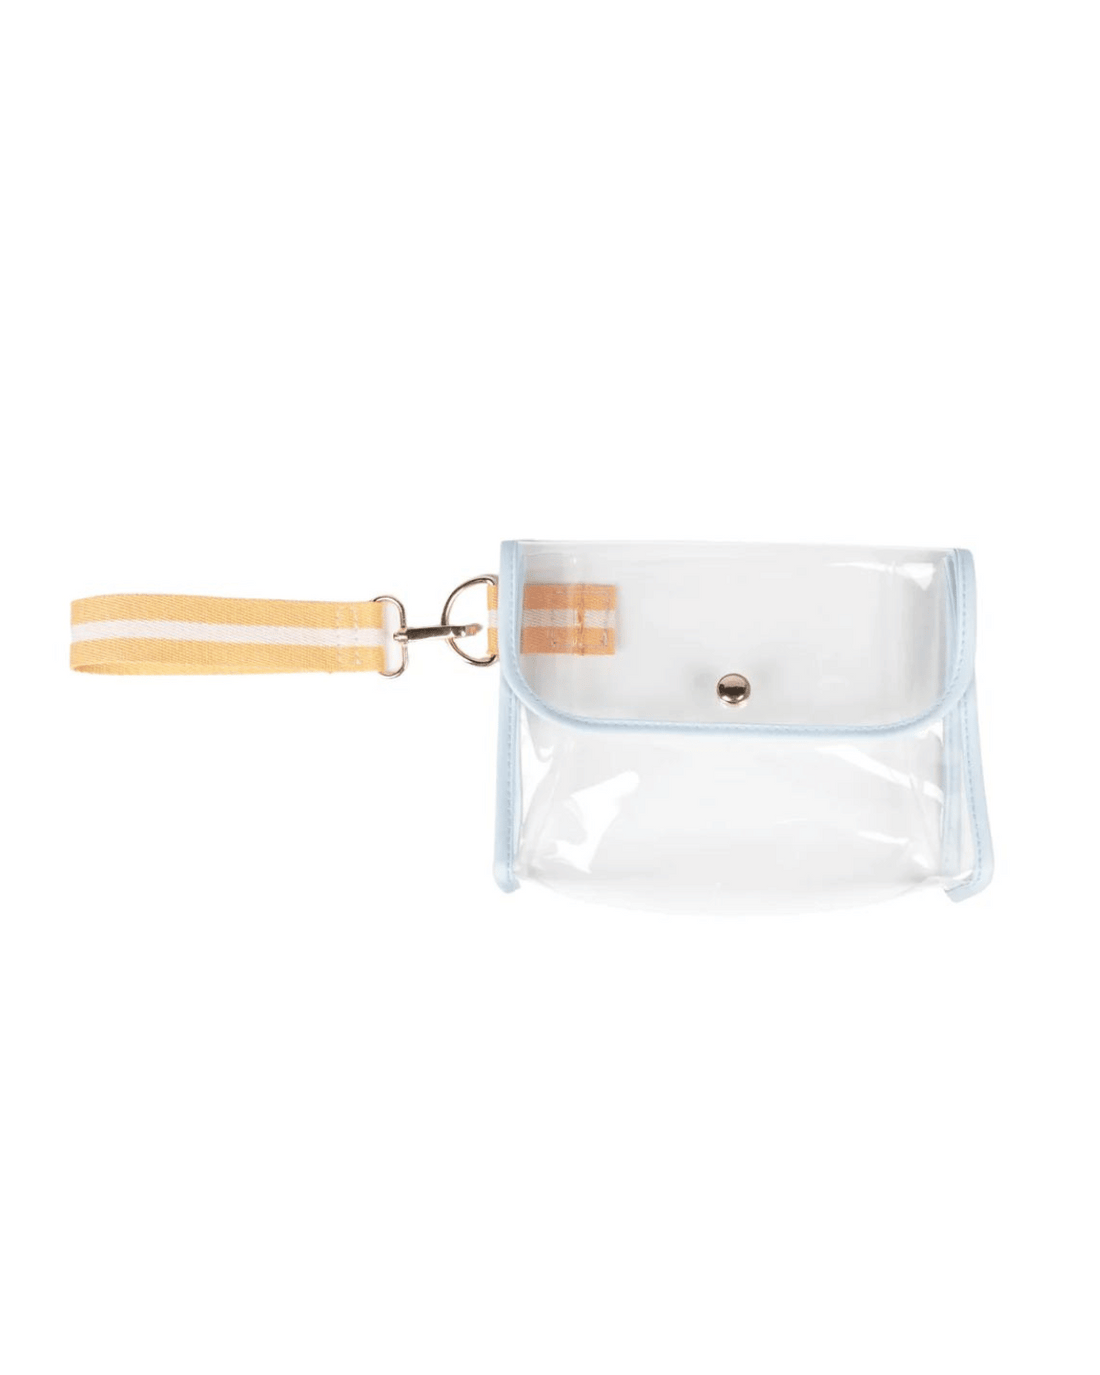 See Through Makeup Bag - Marshmallow Cheeky Traveller Bag by The Somewhere Co